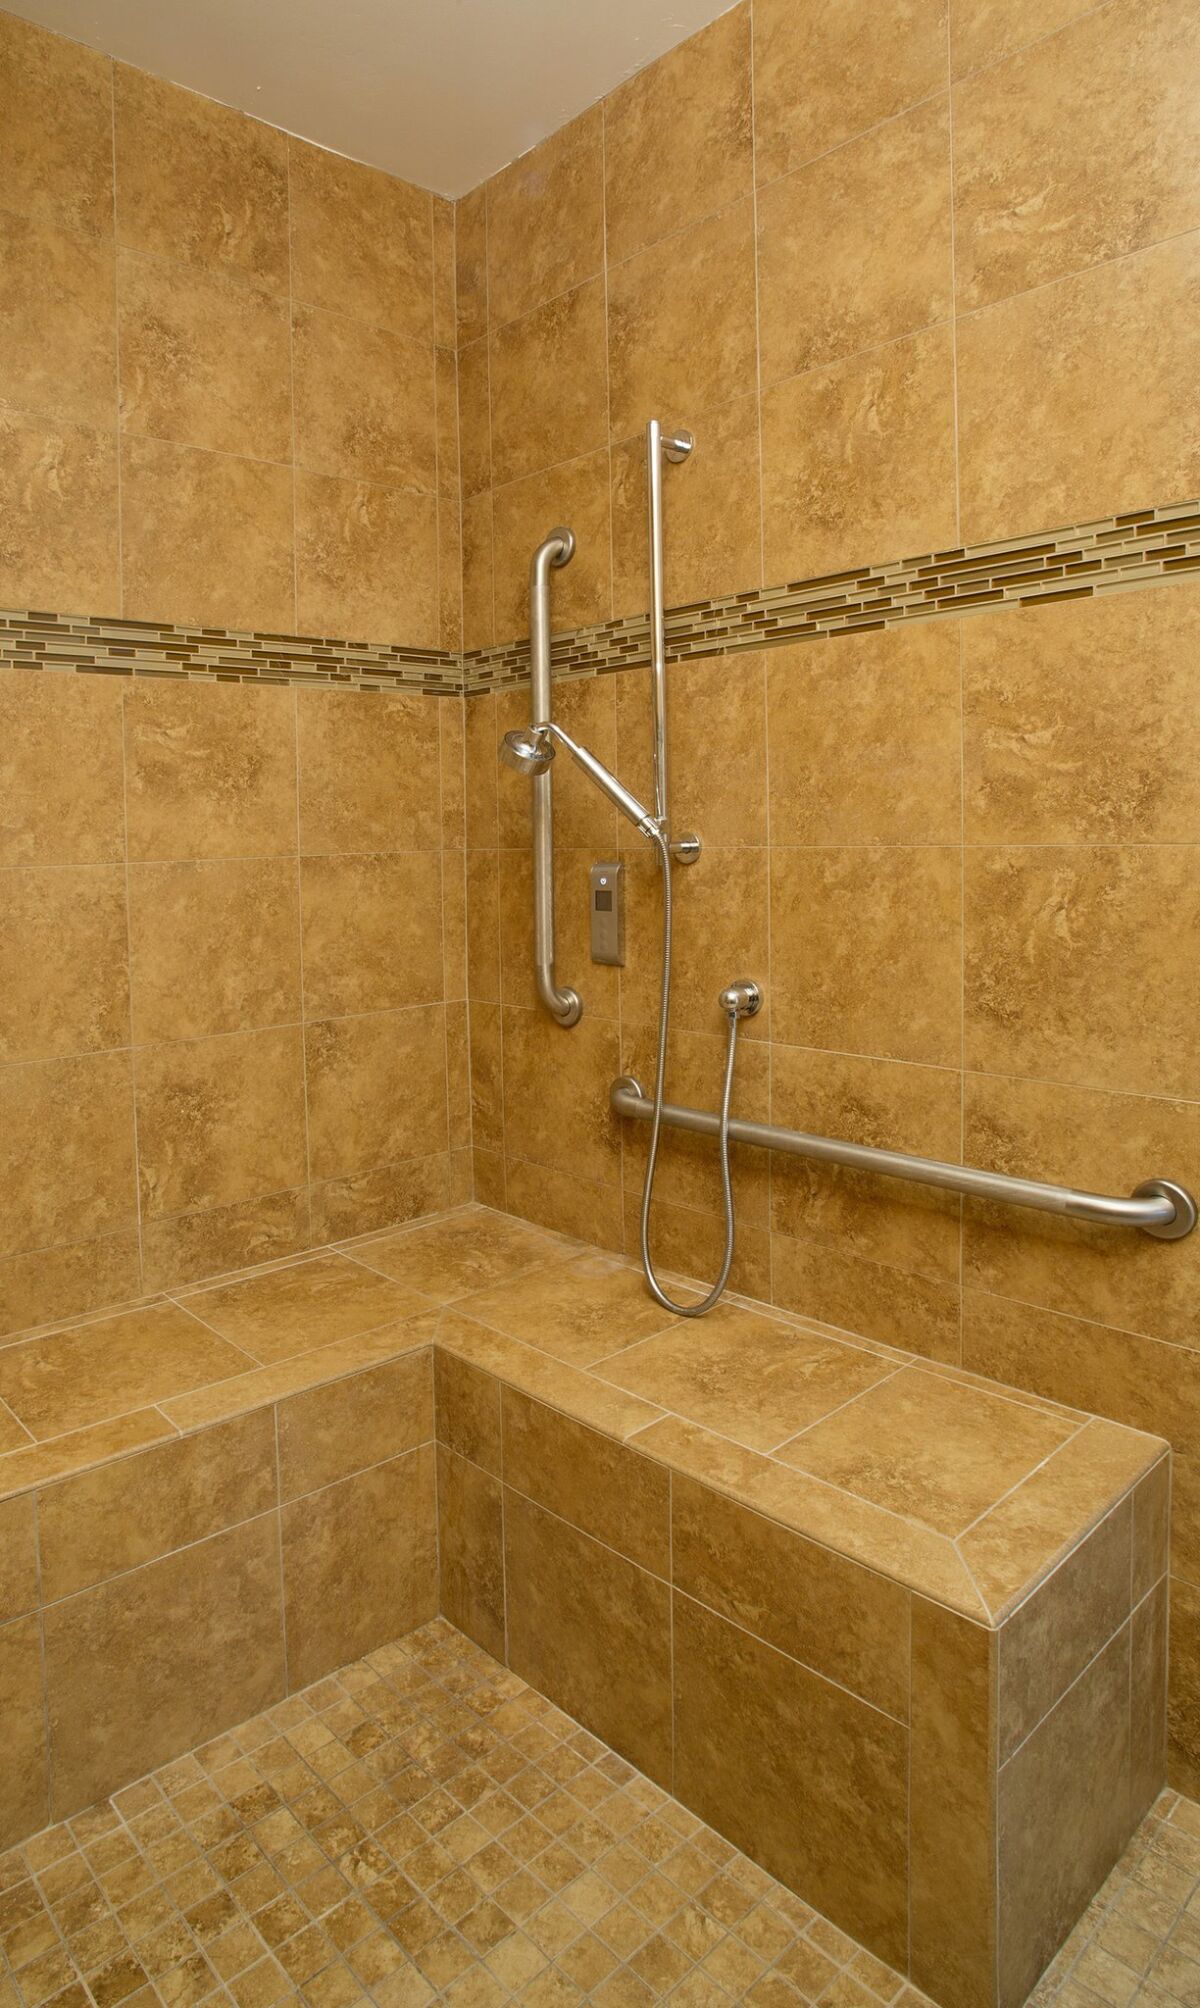 The master shower has a zero-threshold entry and a broad built-in bench. — Nelvin C. Cepeda